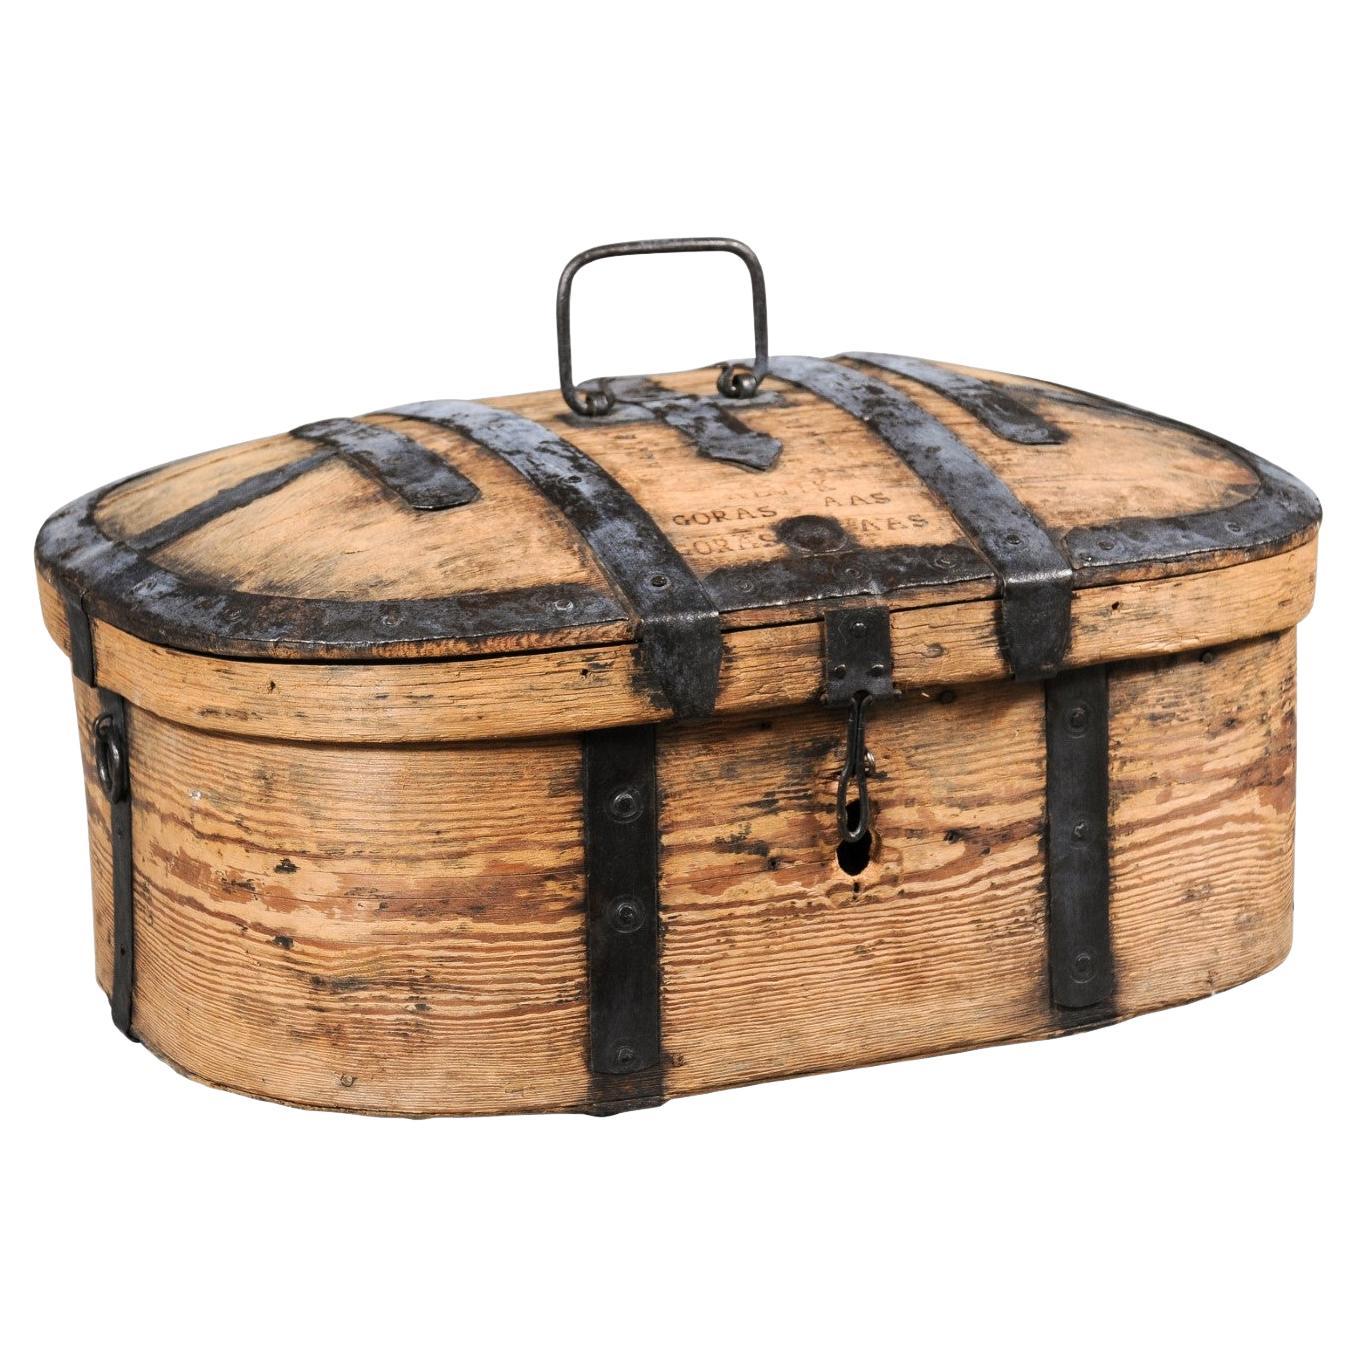 Swedish 1790s Rustic Oval Top Wooden Box with Iron Accents and Distressed Patina For Sale